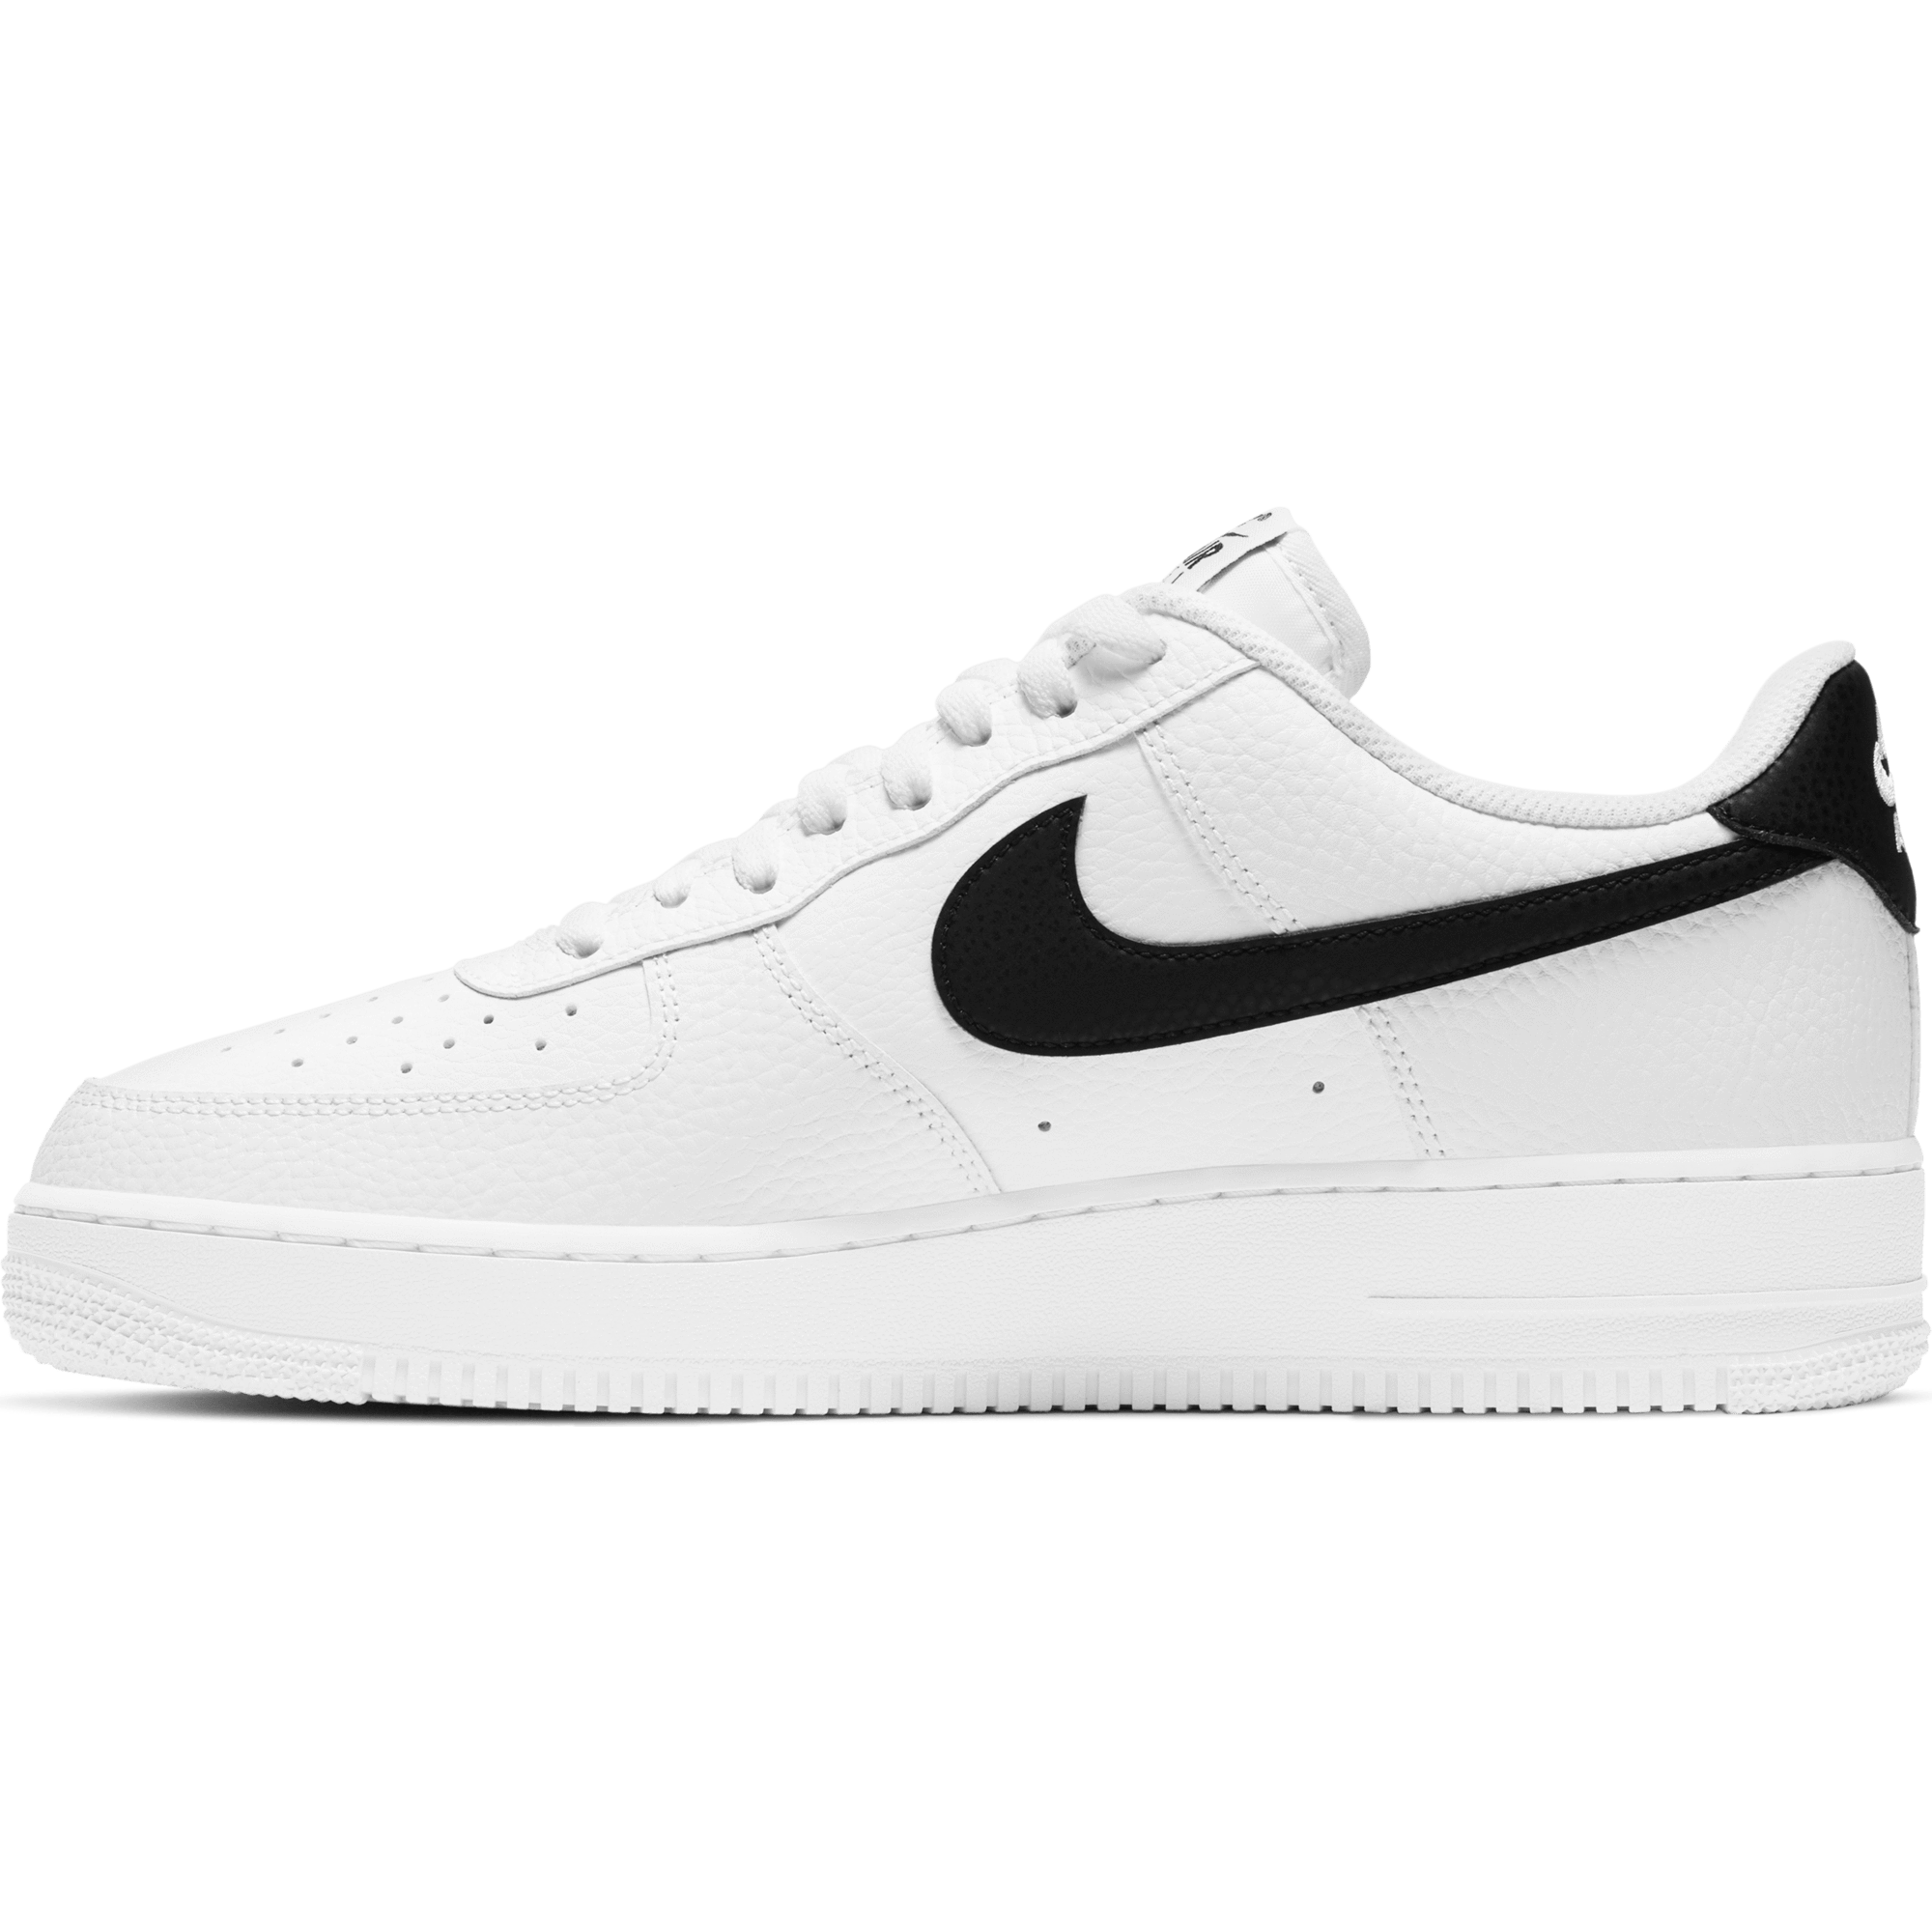 The Nike x Off-White Air Force 1 Black Is Literally Museum-Quality